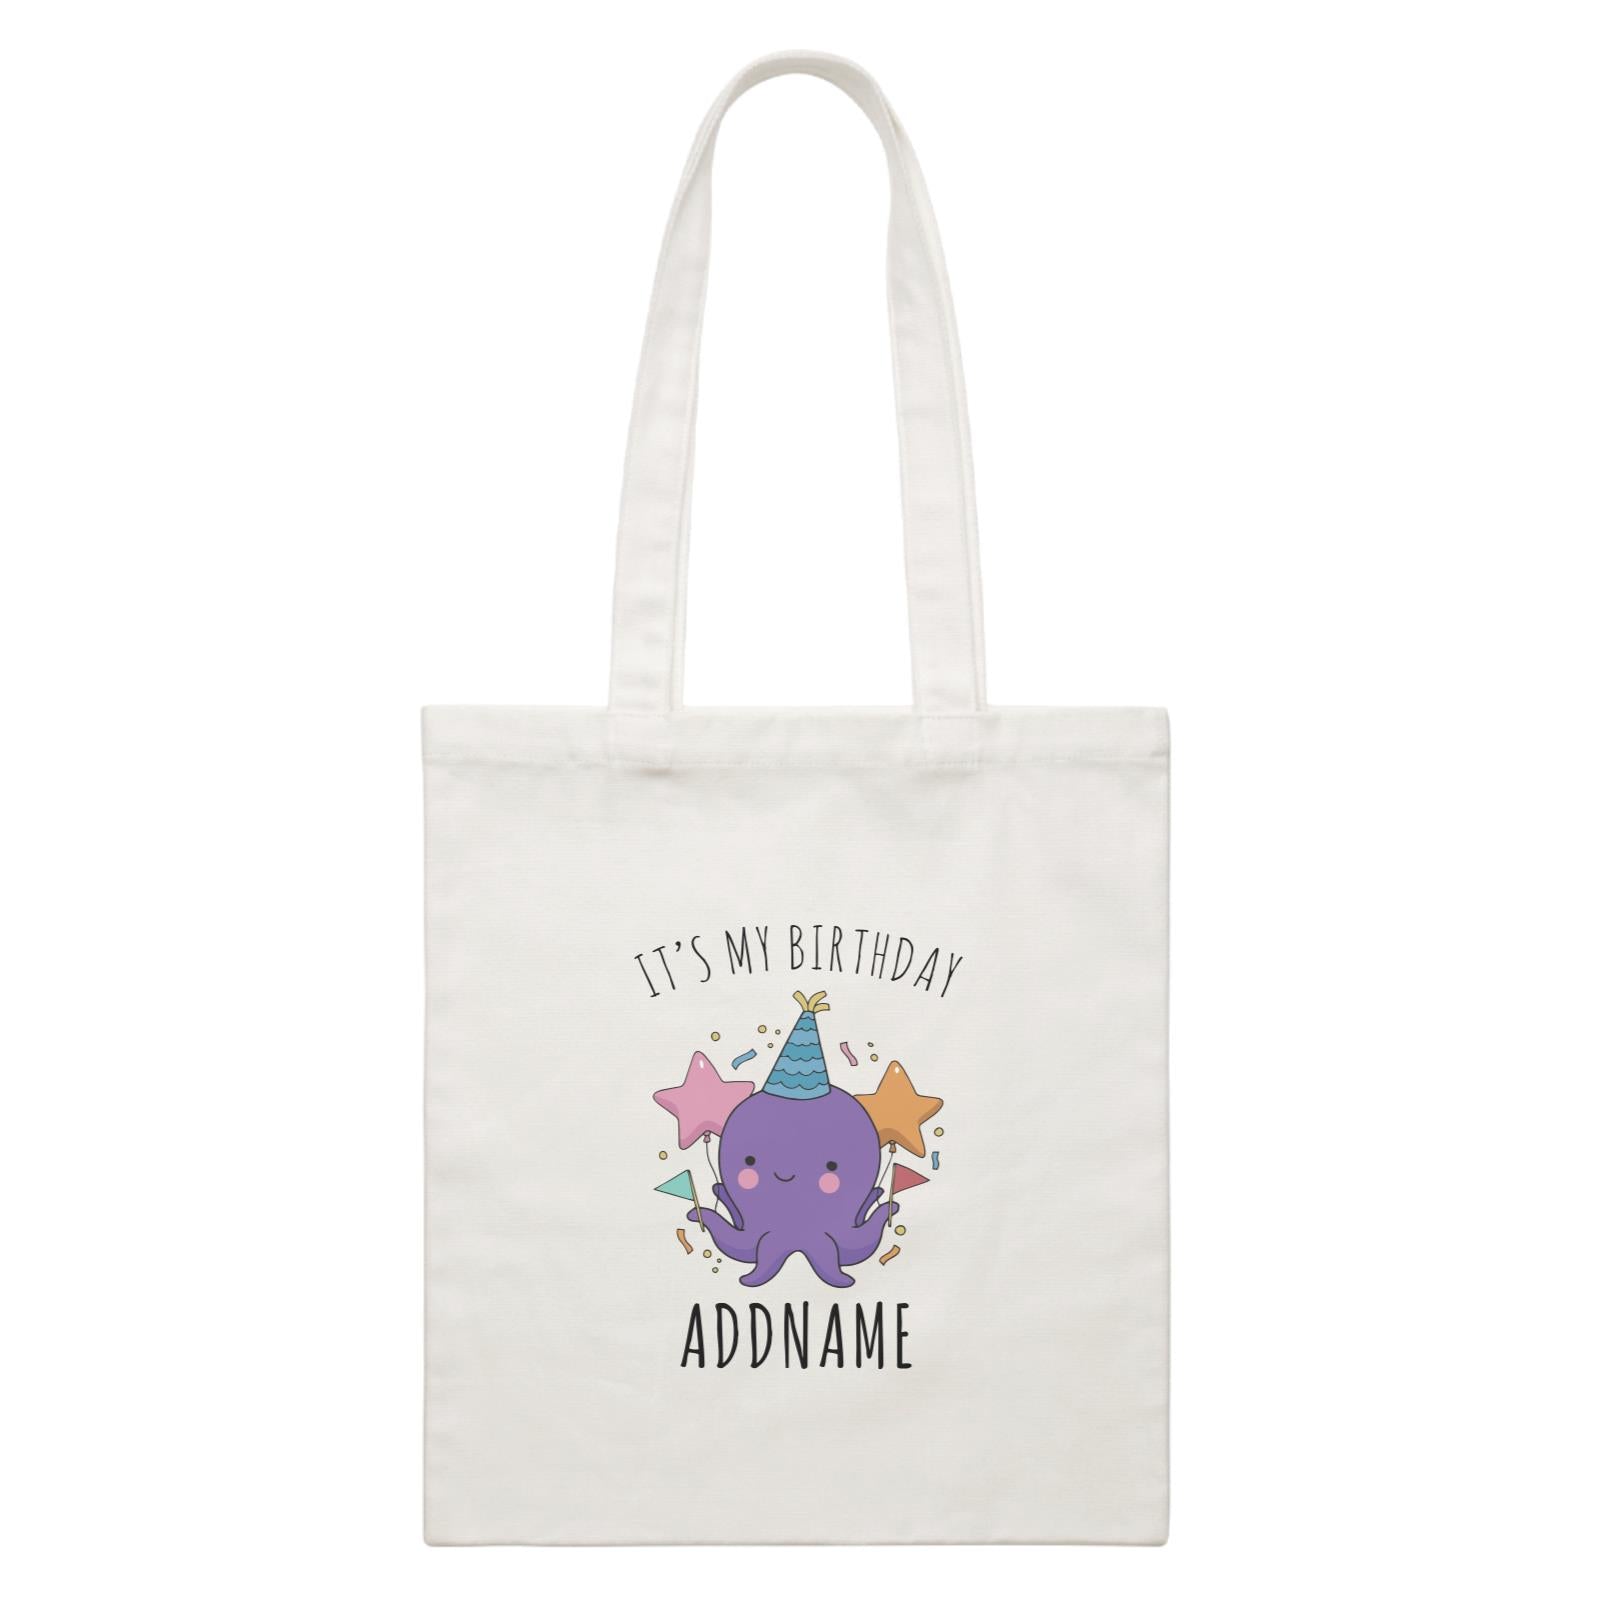 Birthday Sketch Animals Octopus with Flags It's My Birthday Addname White Canvas Bag